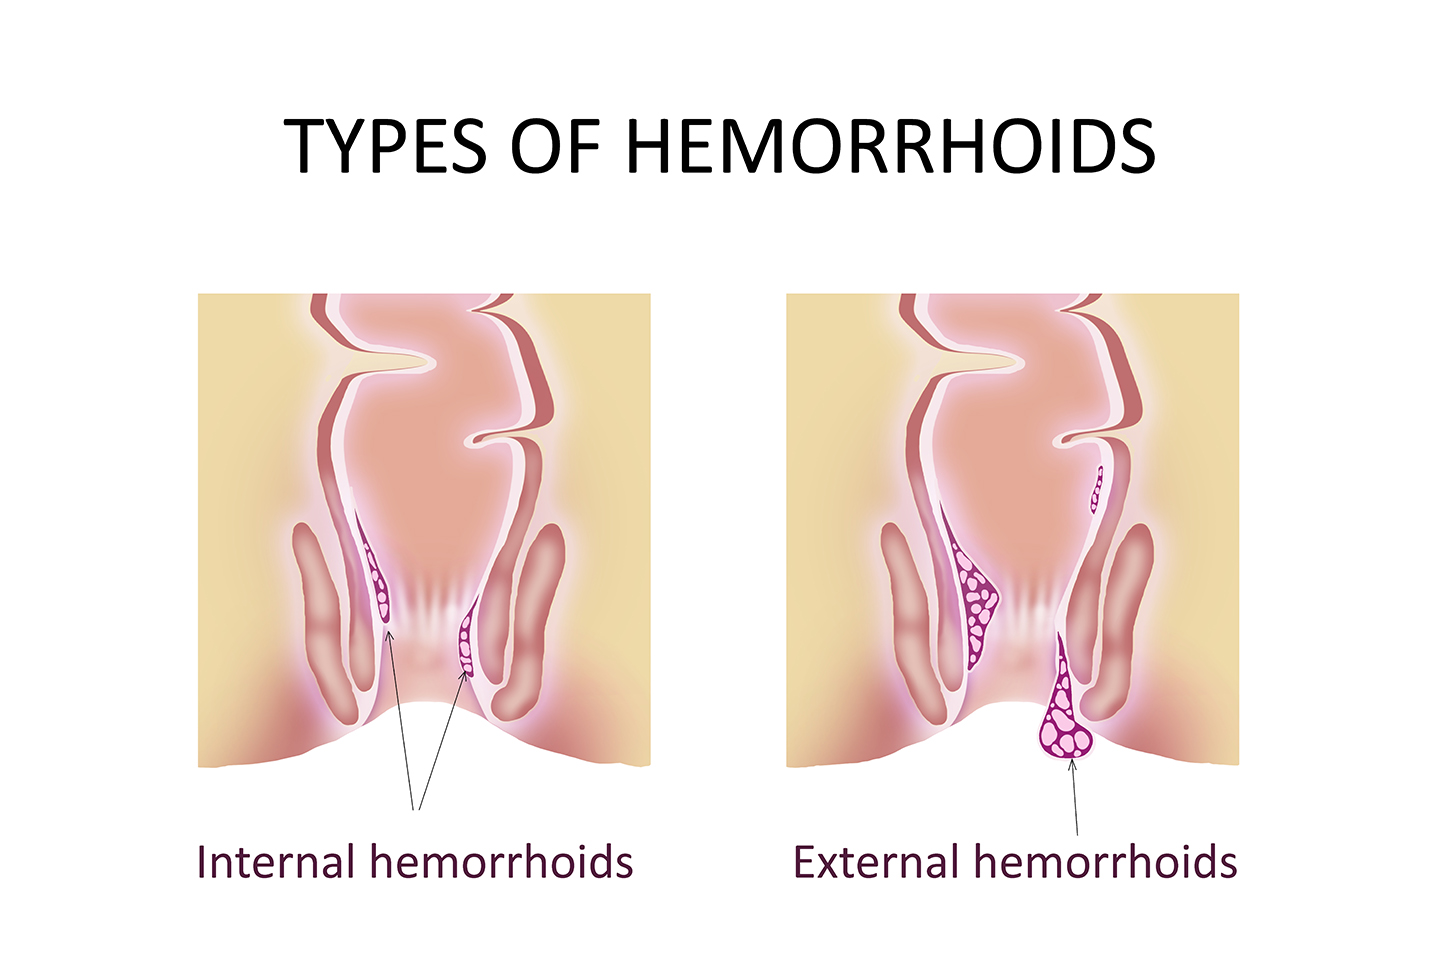  Hemorrhoids - treatment, symptoms, causes and prevention